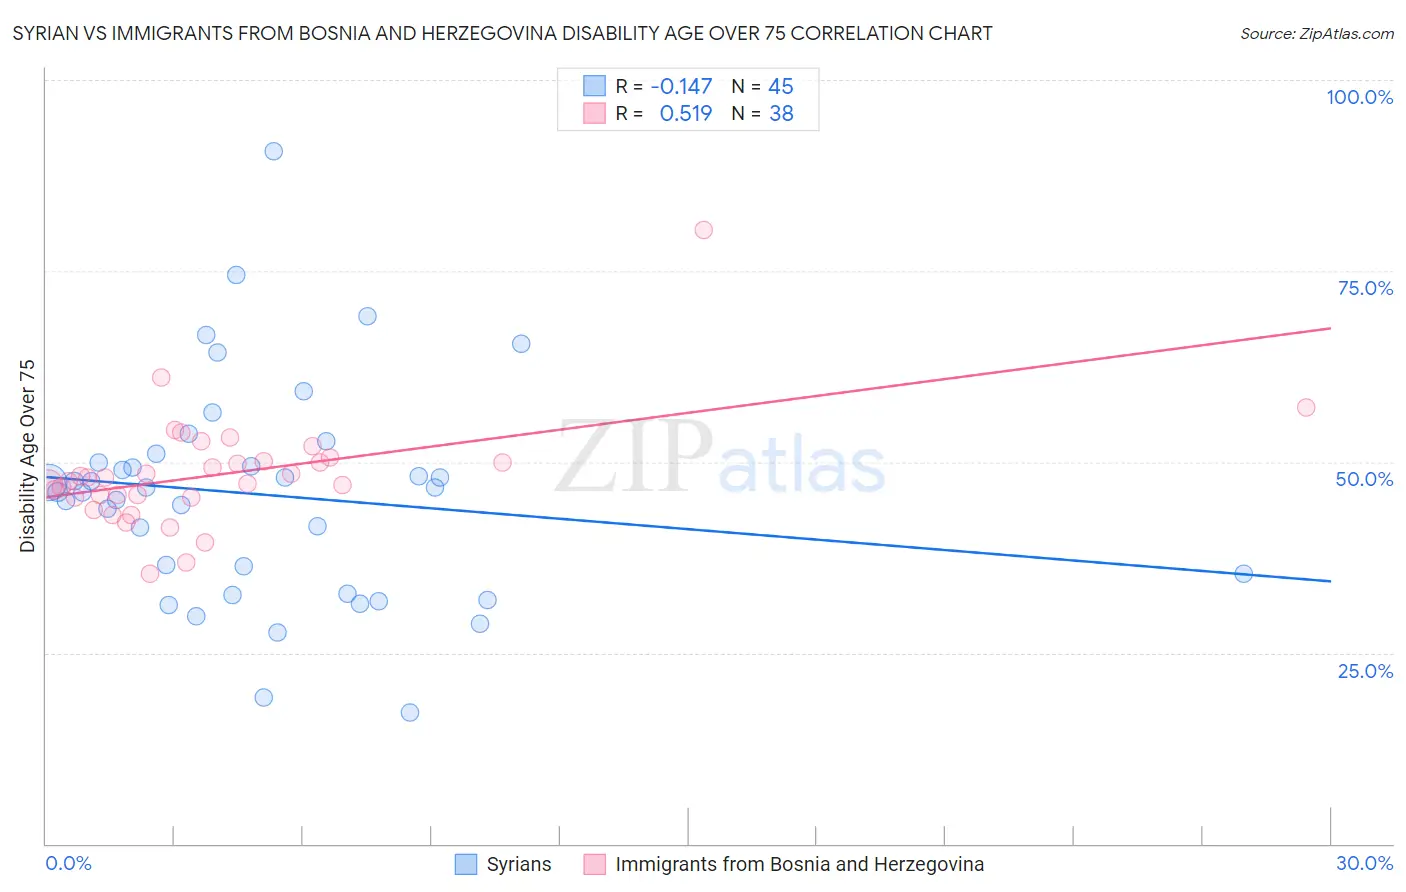 Syrian vs Immigrants from Bosnia and Herzegovina Disability Age Over 75